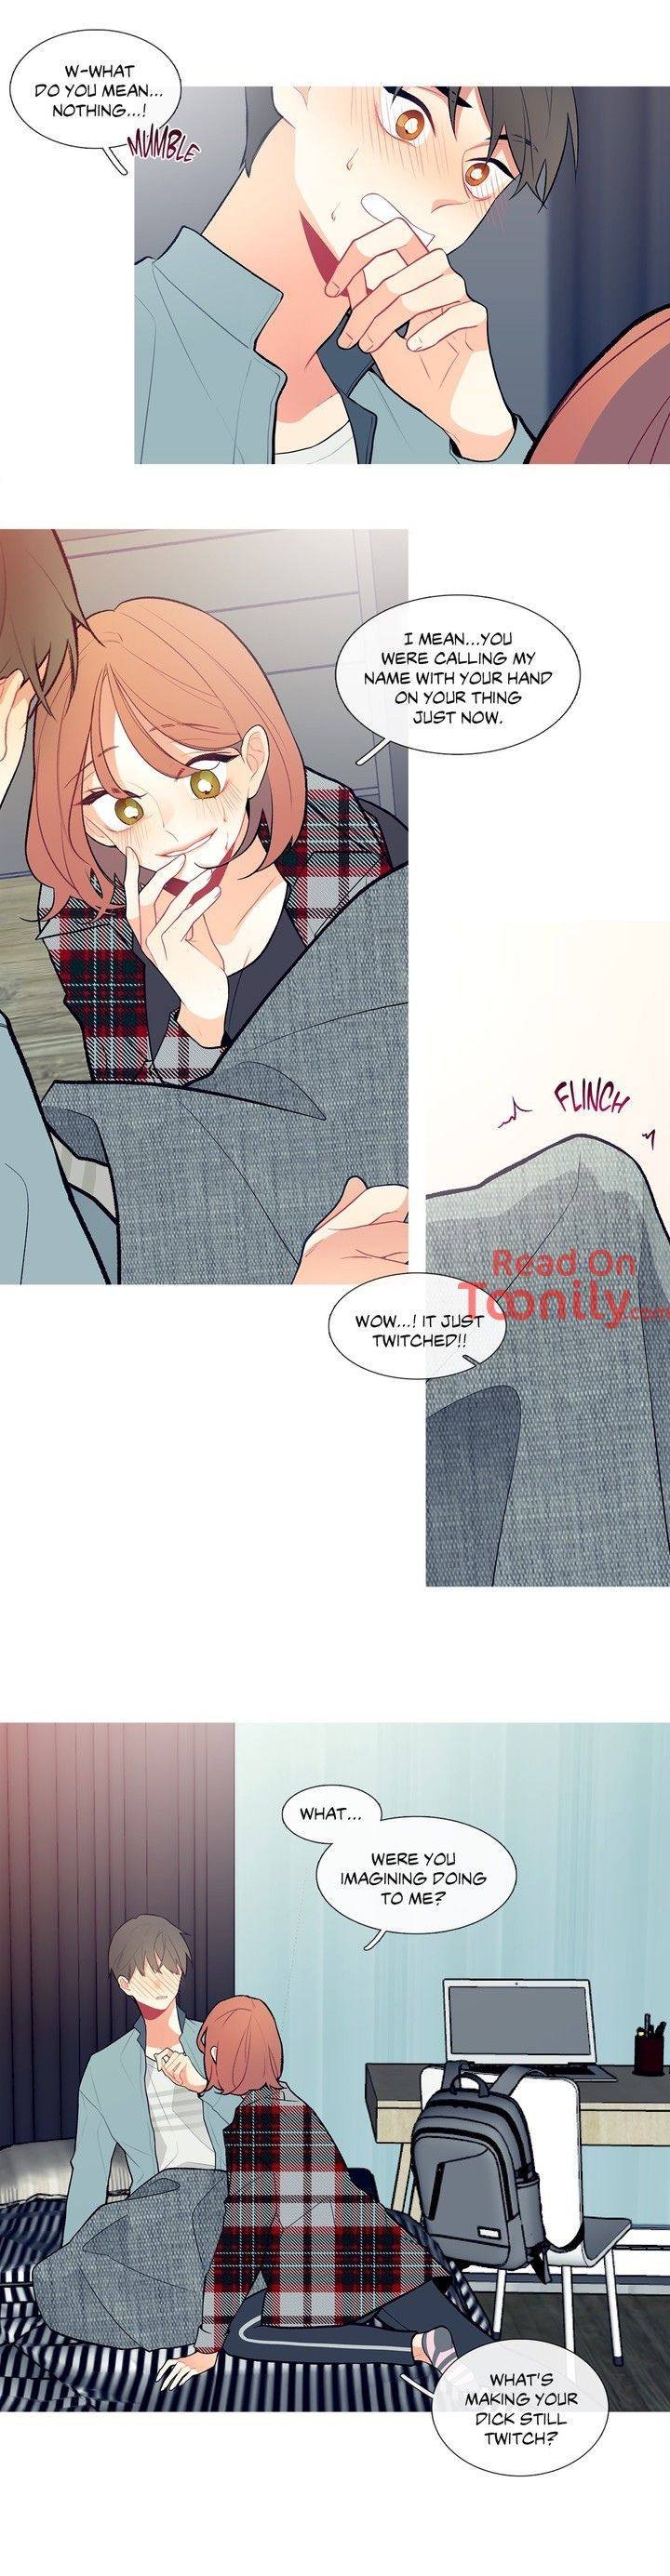 whats-going-on-chap-3-9